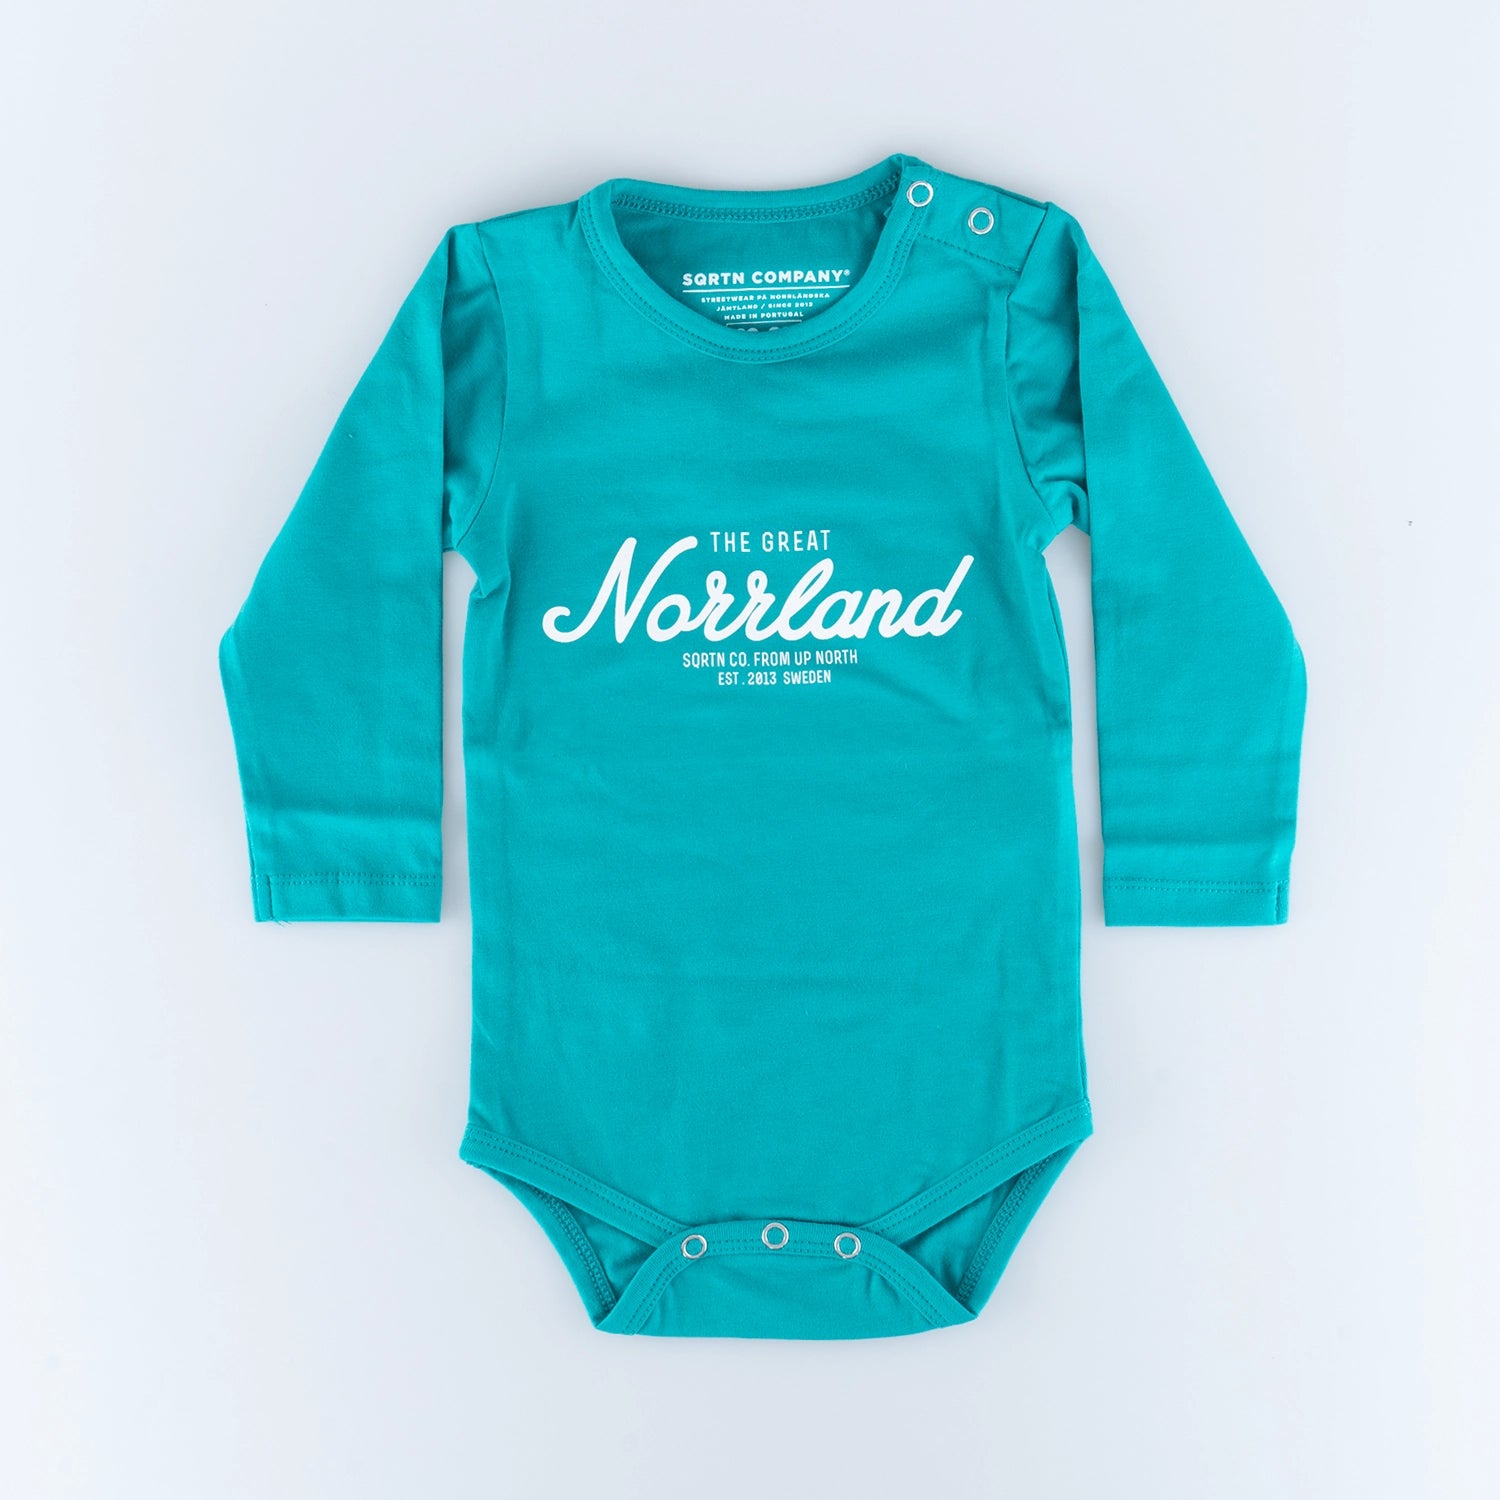 GREAT NORRLAND BODY - TROPICAL BLUE